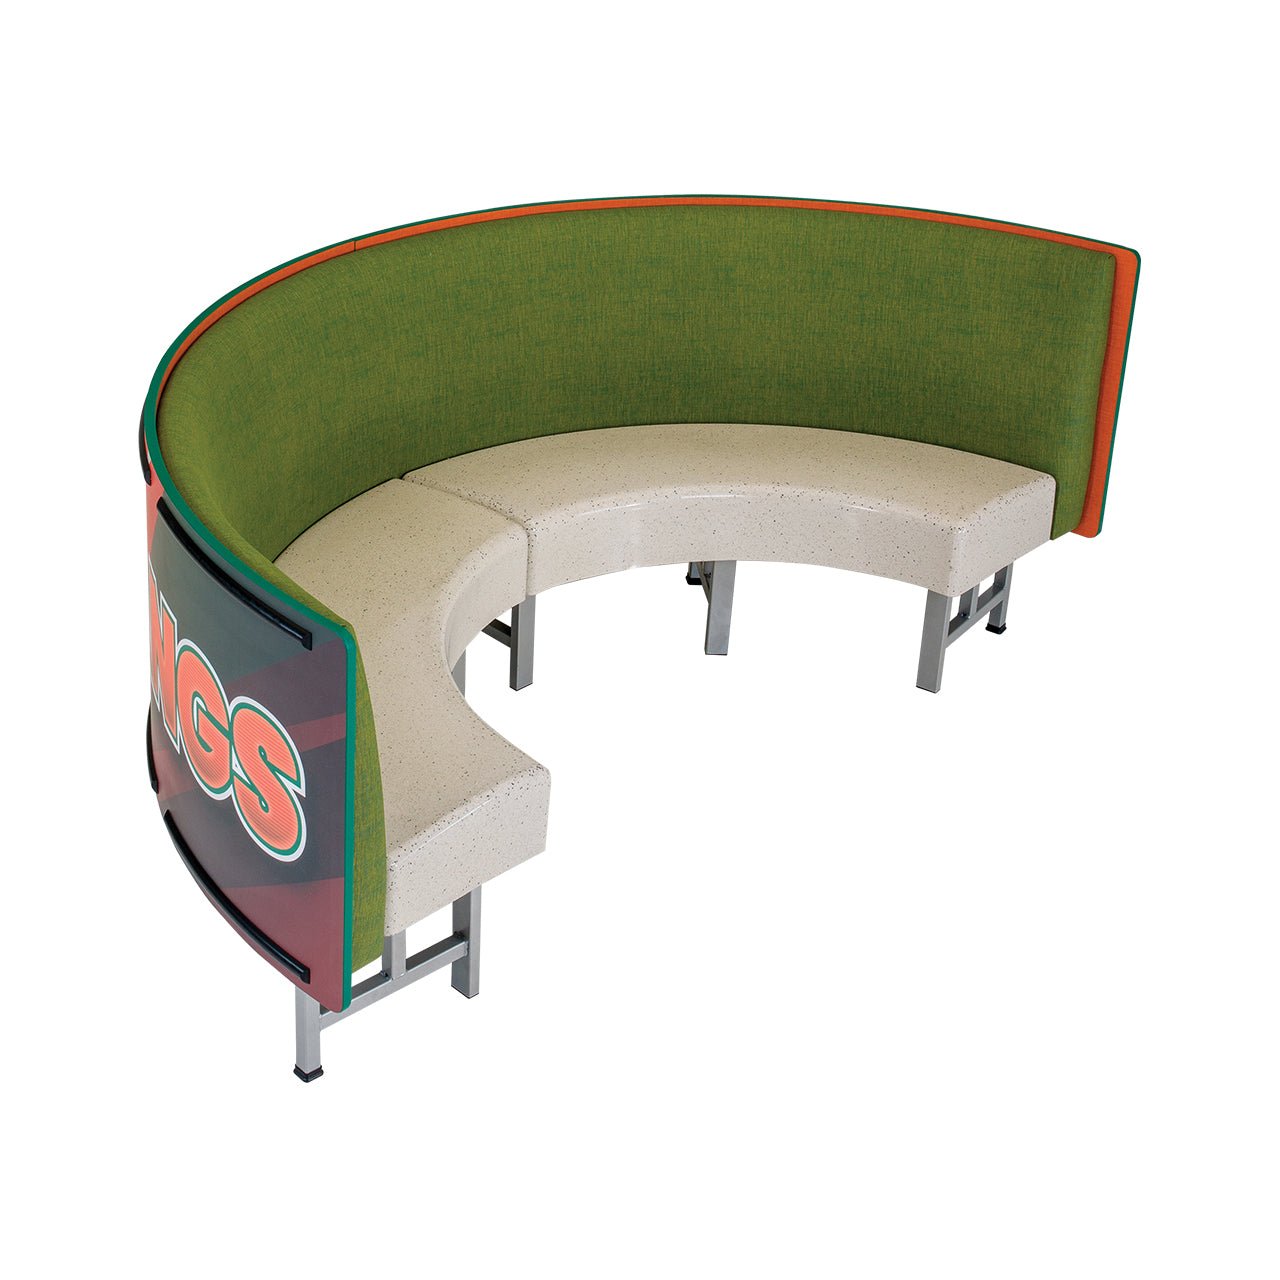 AmTab Mobile Booth Seating - Half Circle - 24"W x 48"L (AMT-HMBS244) - SchoolOutlet